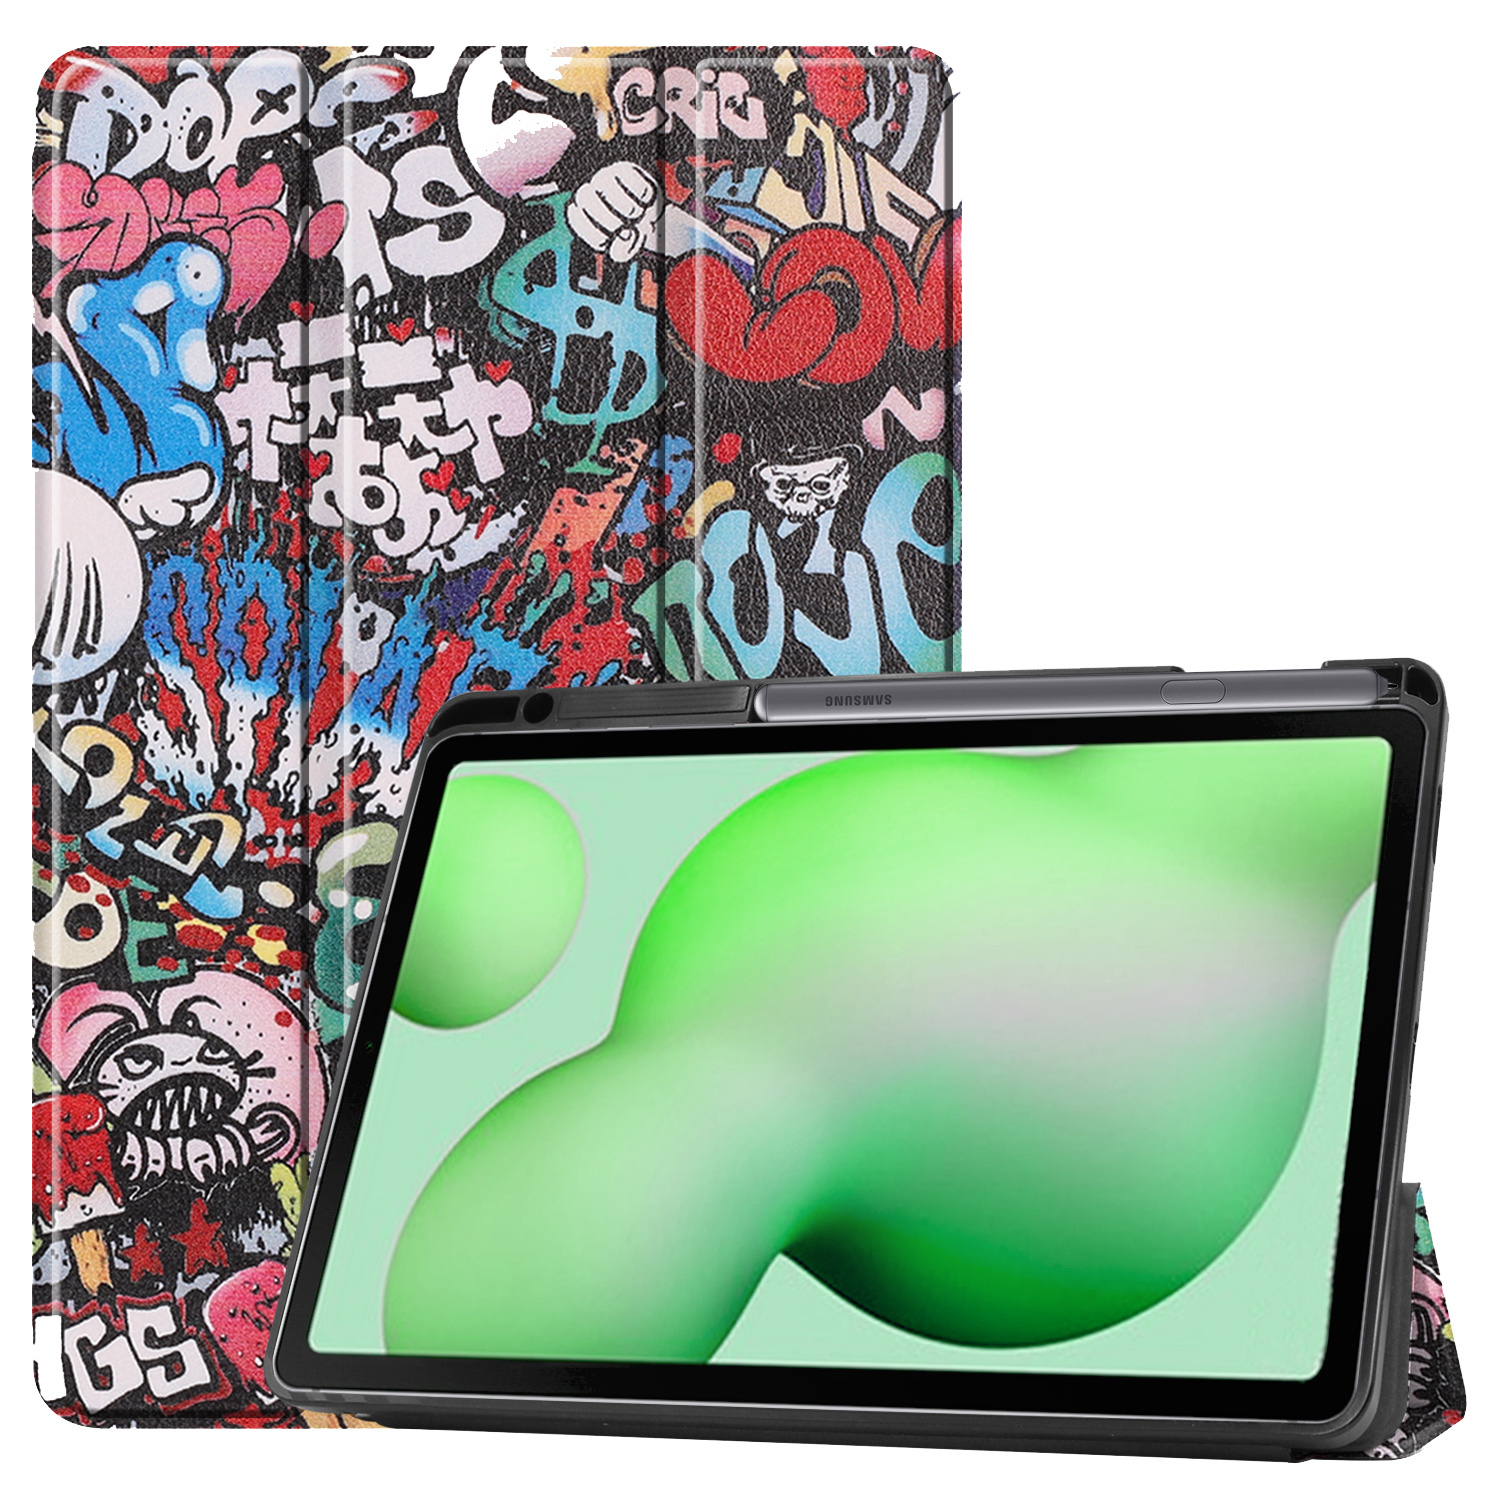 Nomfy Samsung Tab S6 Lite Hoesje Book Case Hoes Met Uitsparing S Pen - Samsung Galaxy Tab S6 Lite Hoes Hardcover Hoesje - Graffity